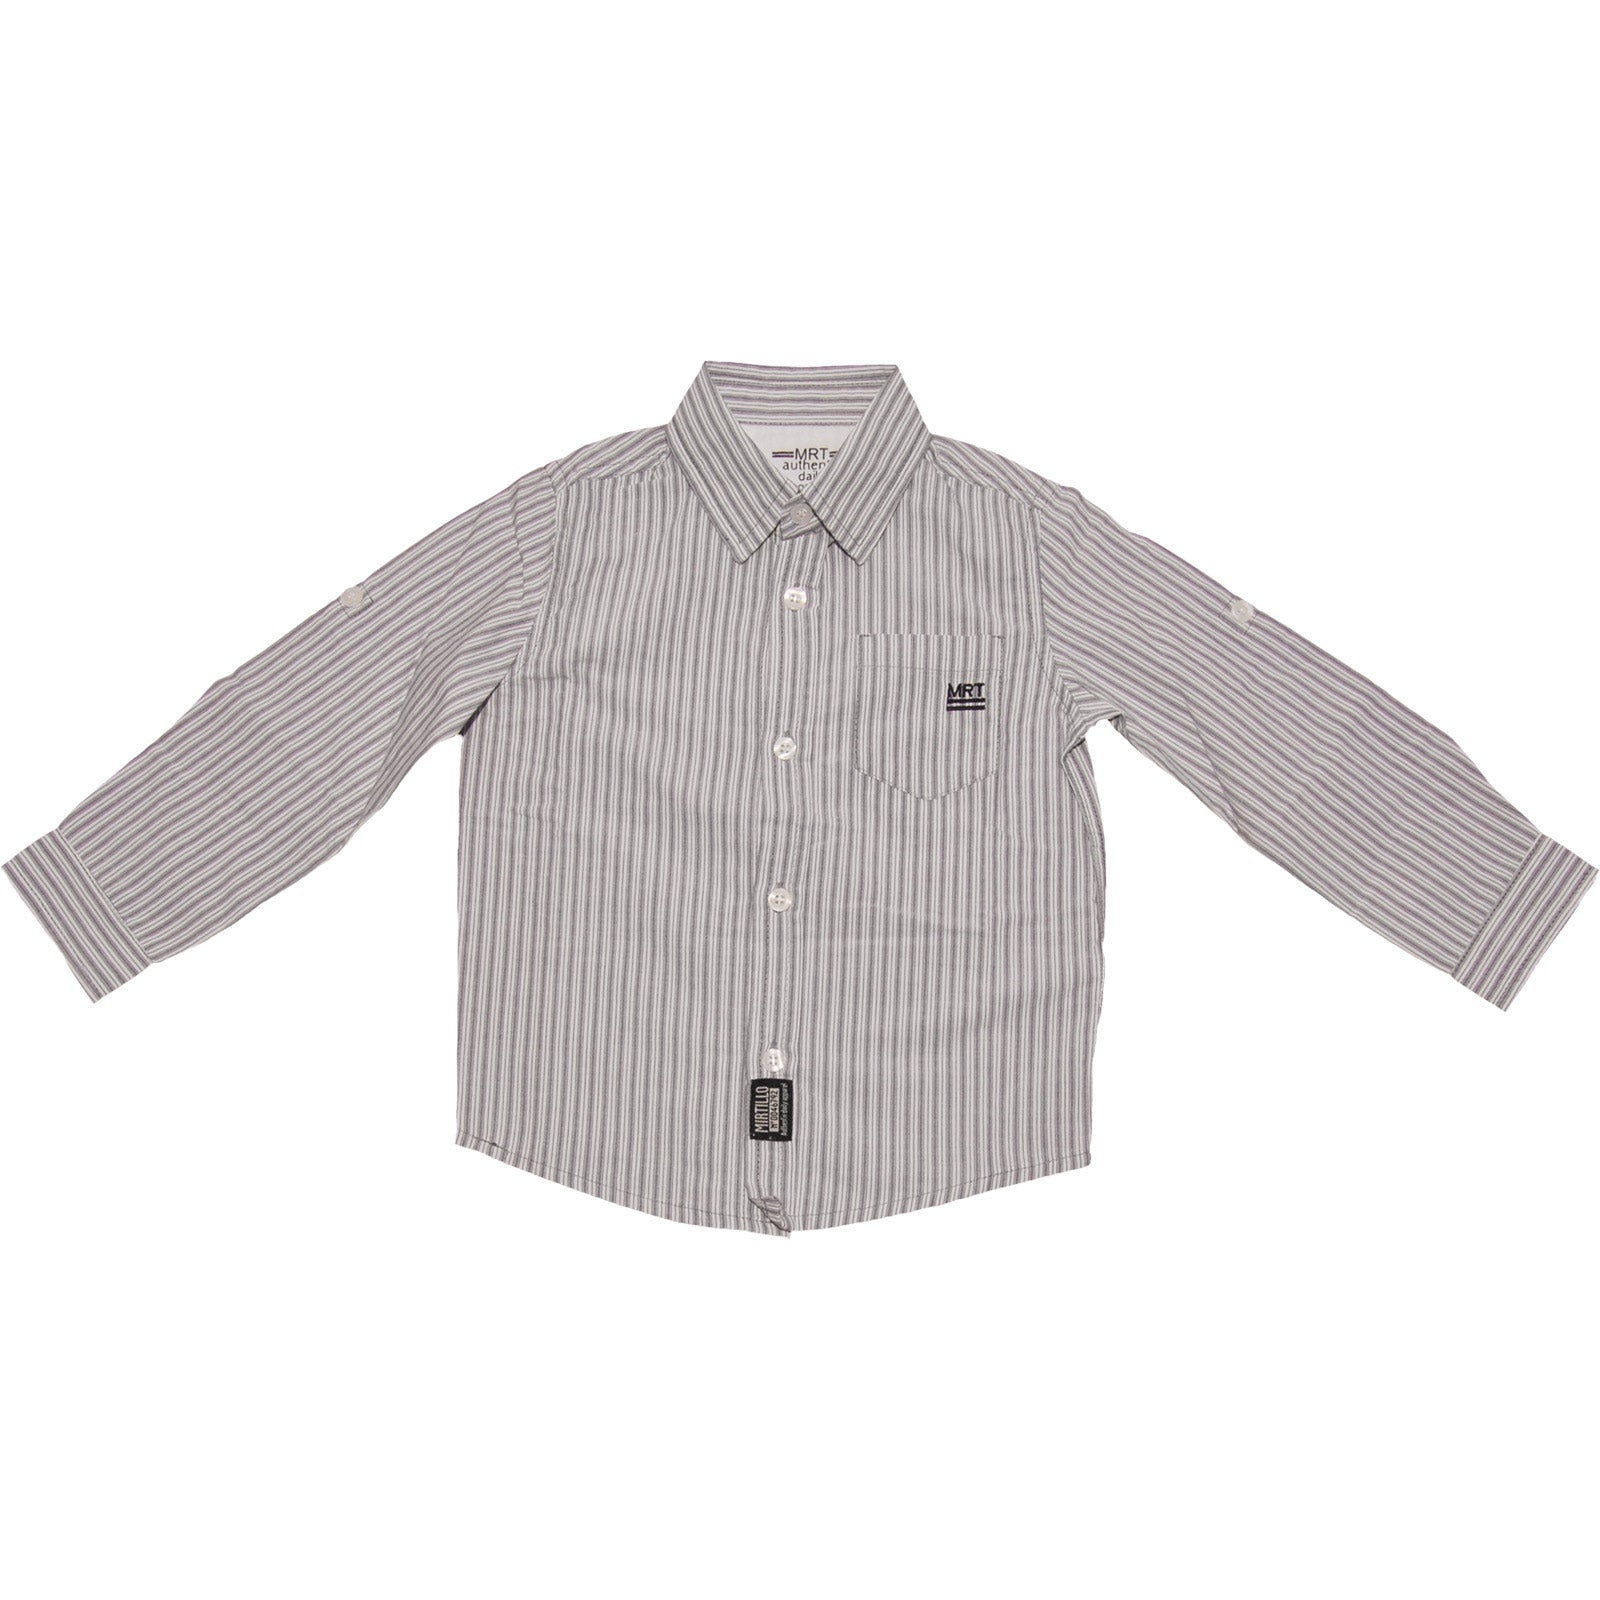 
  Long-sleeved shirt from the children's clothing line Blueberry, striped pattern, blue on a whi...